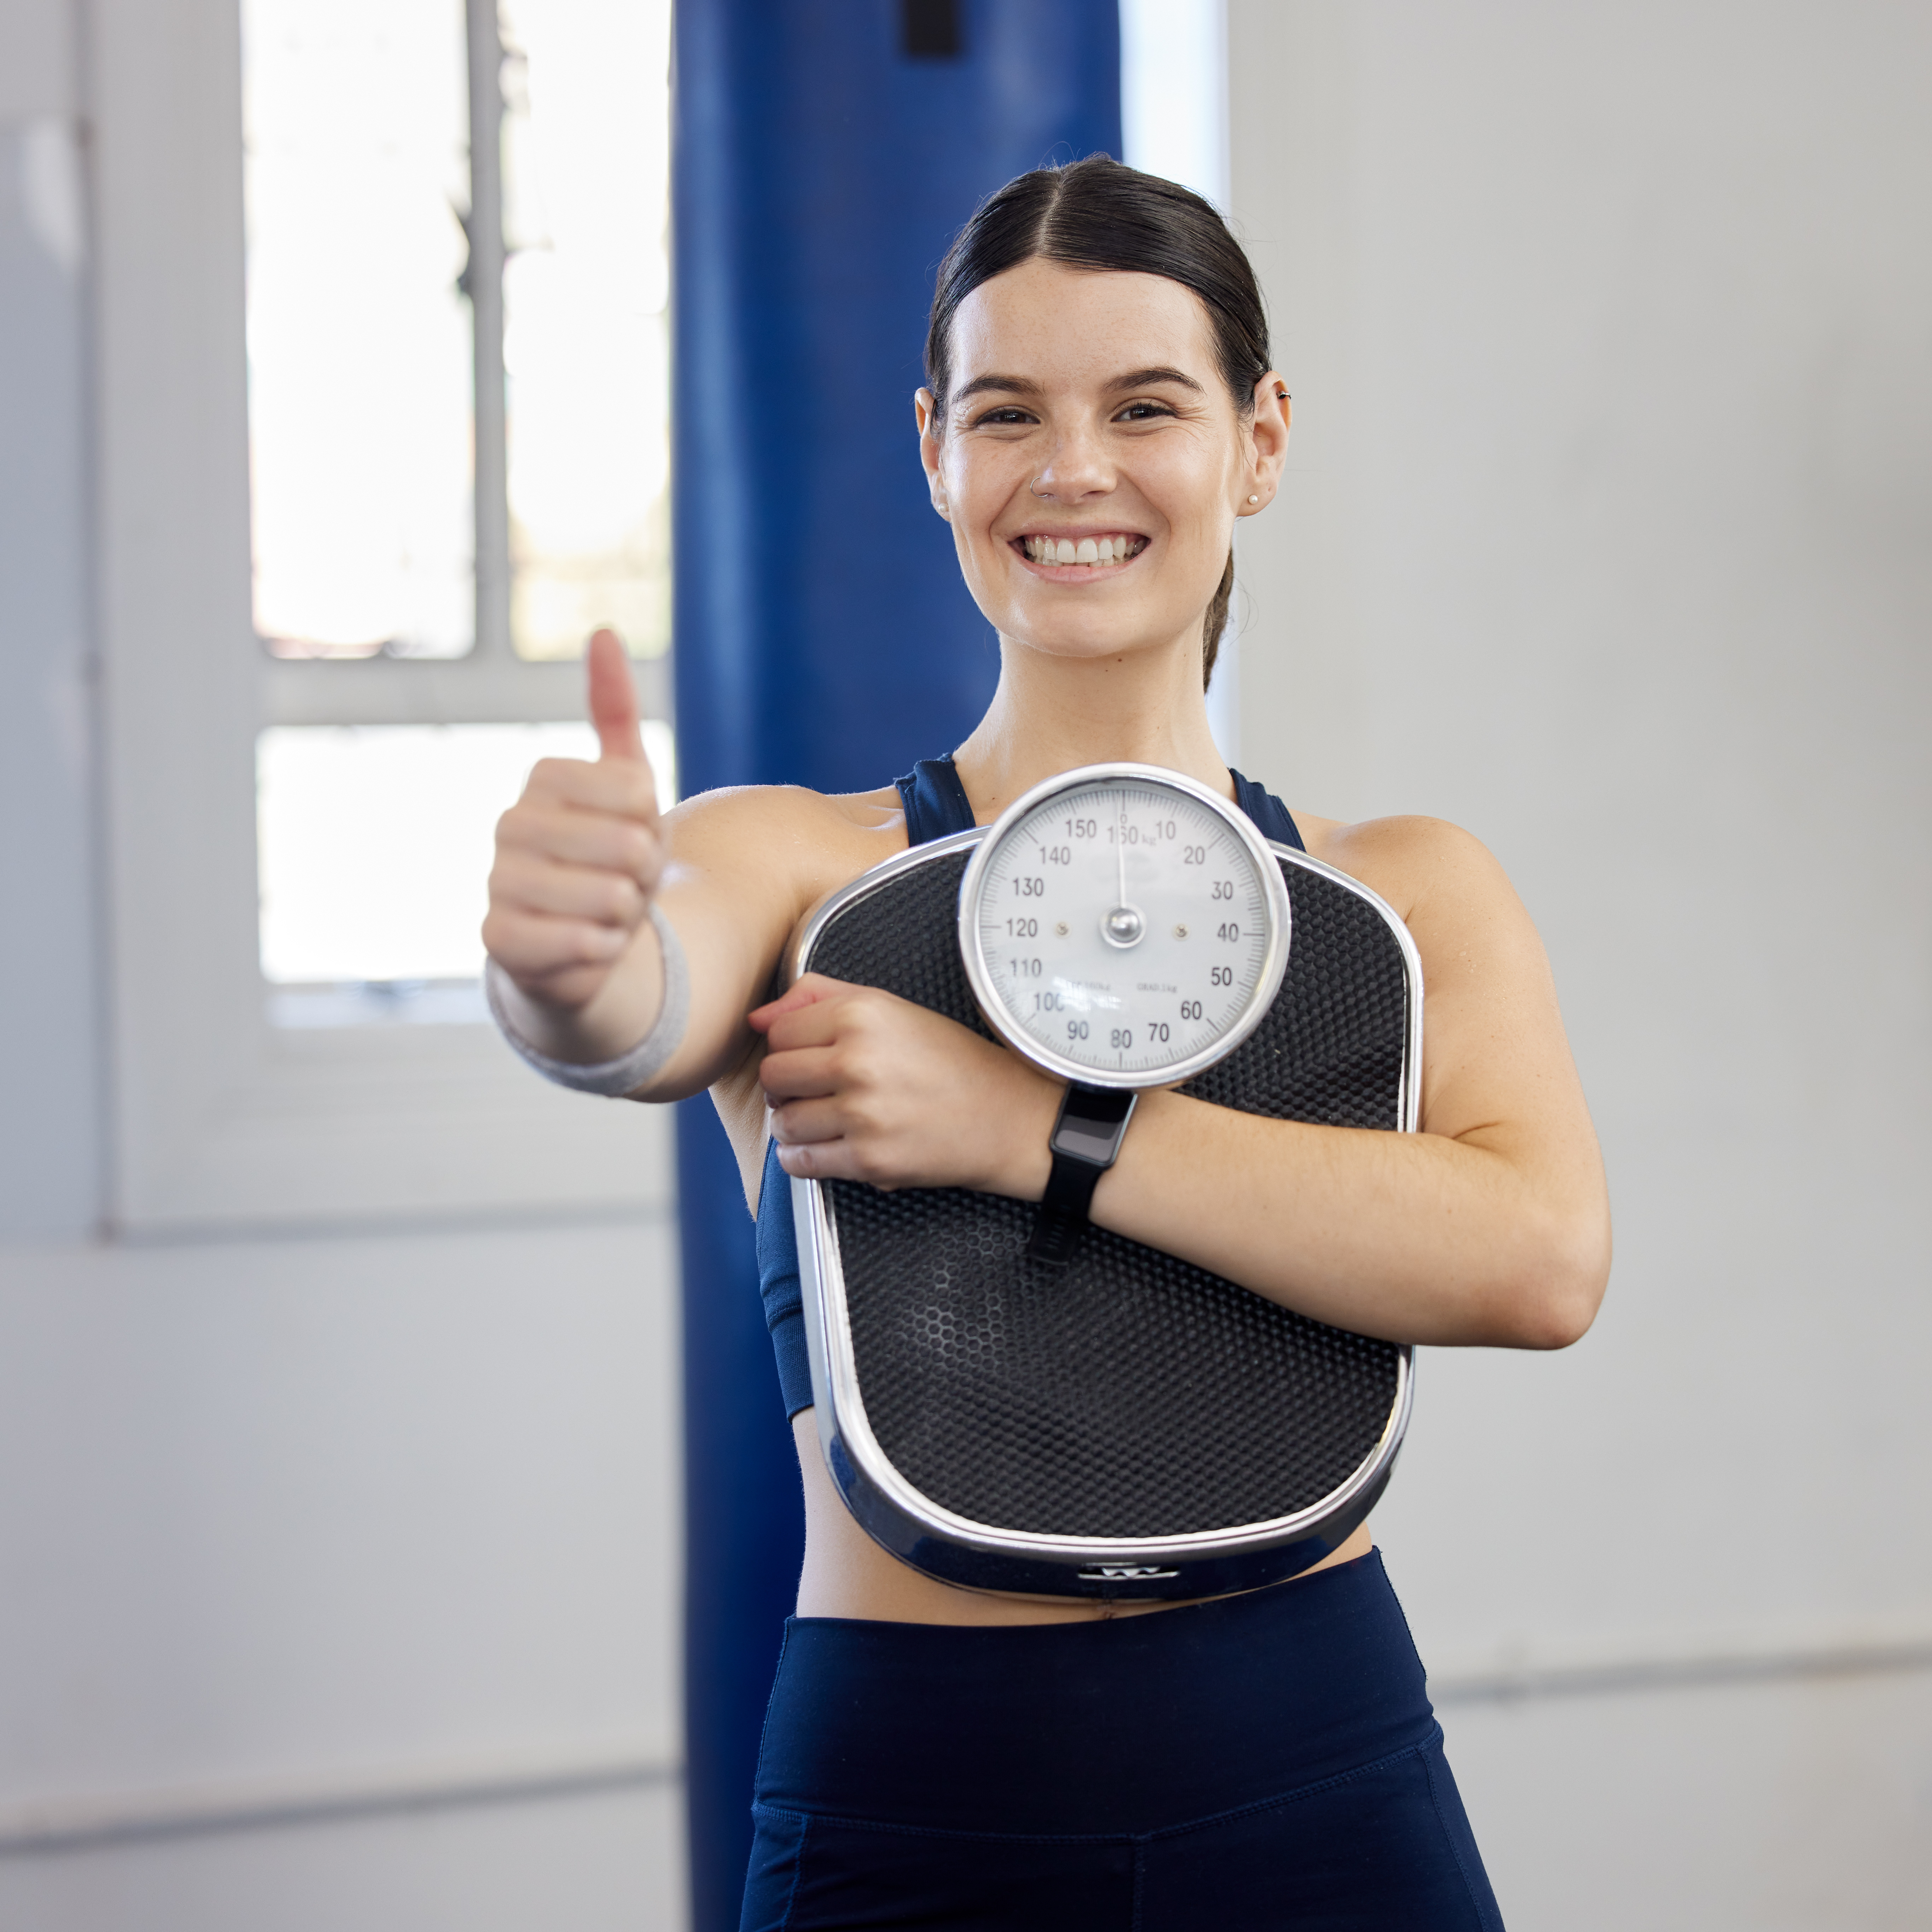 Woman, gym portrait and thumbs up with scale, wellness and weight loss goal for health, body or fit